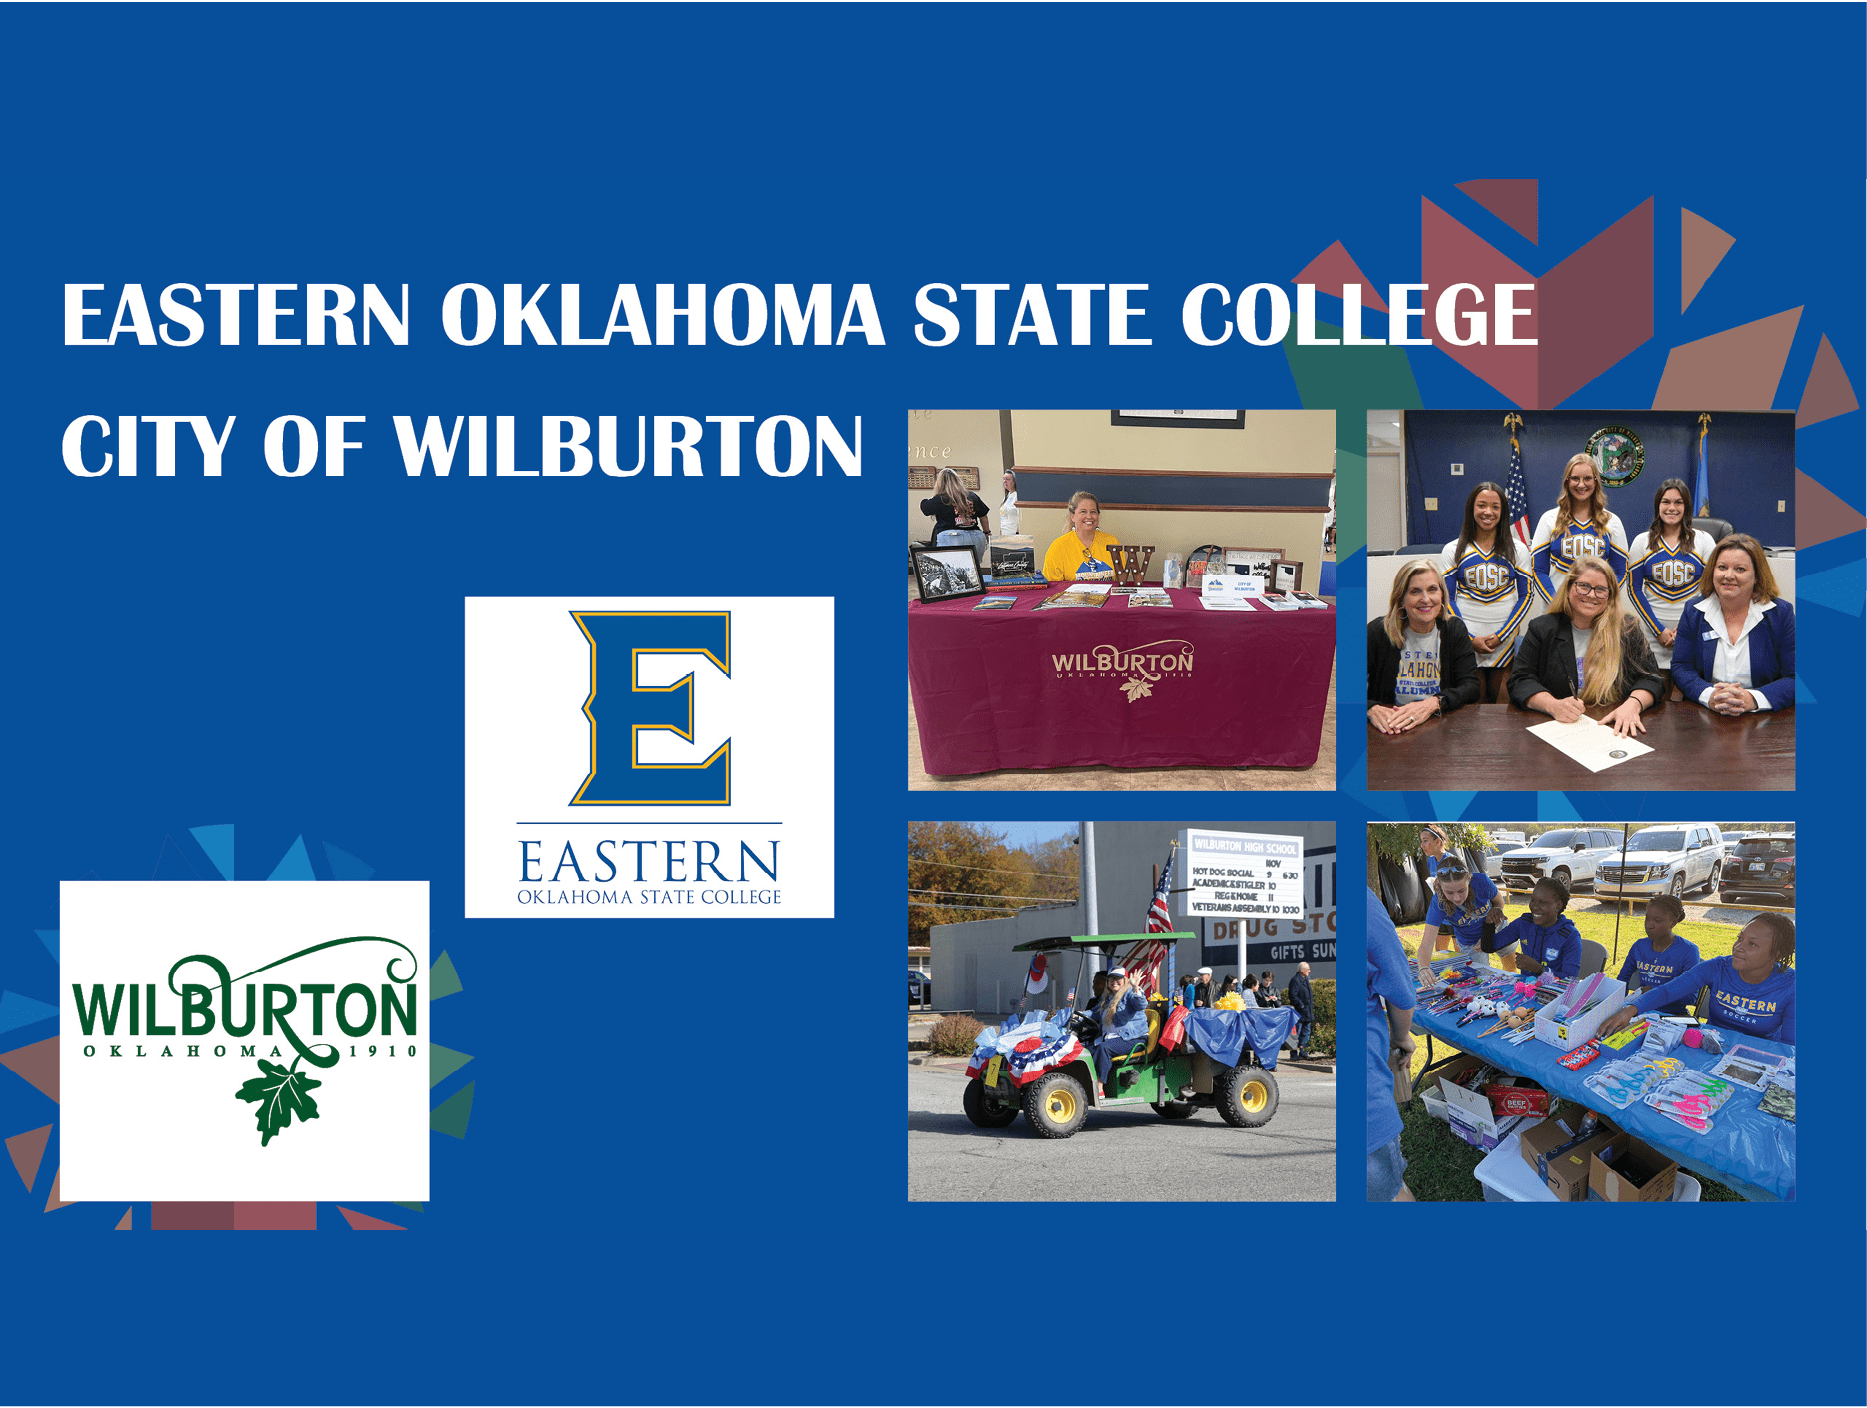 Eastern Oklahoma State College and the City of Wilburton